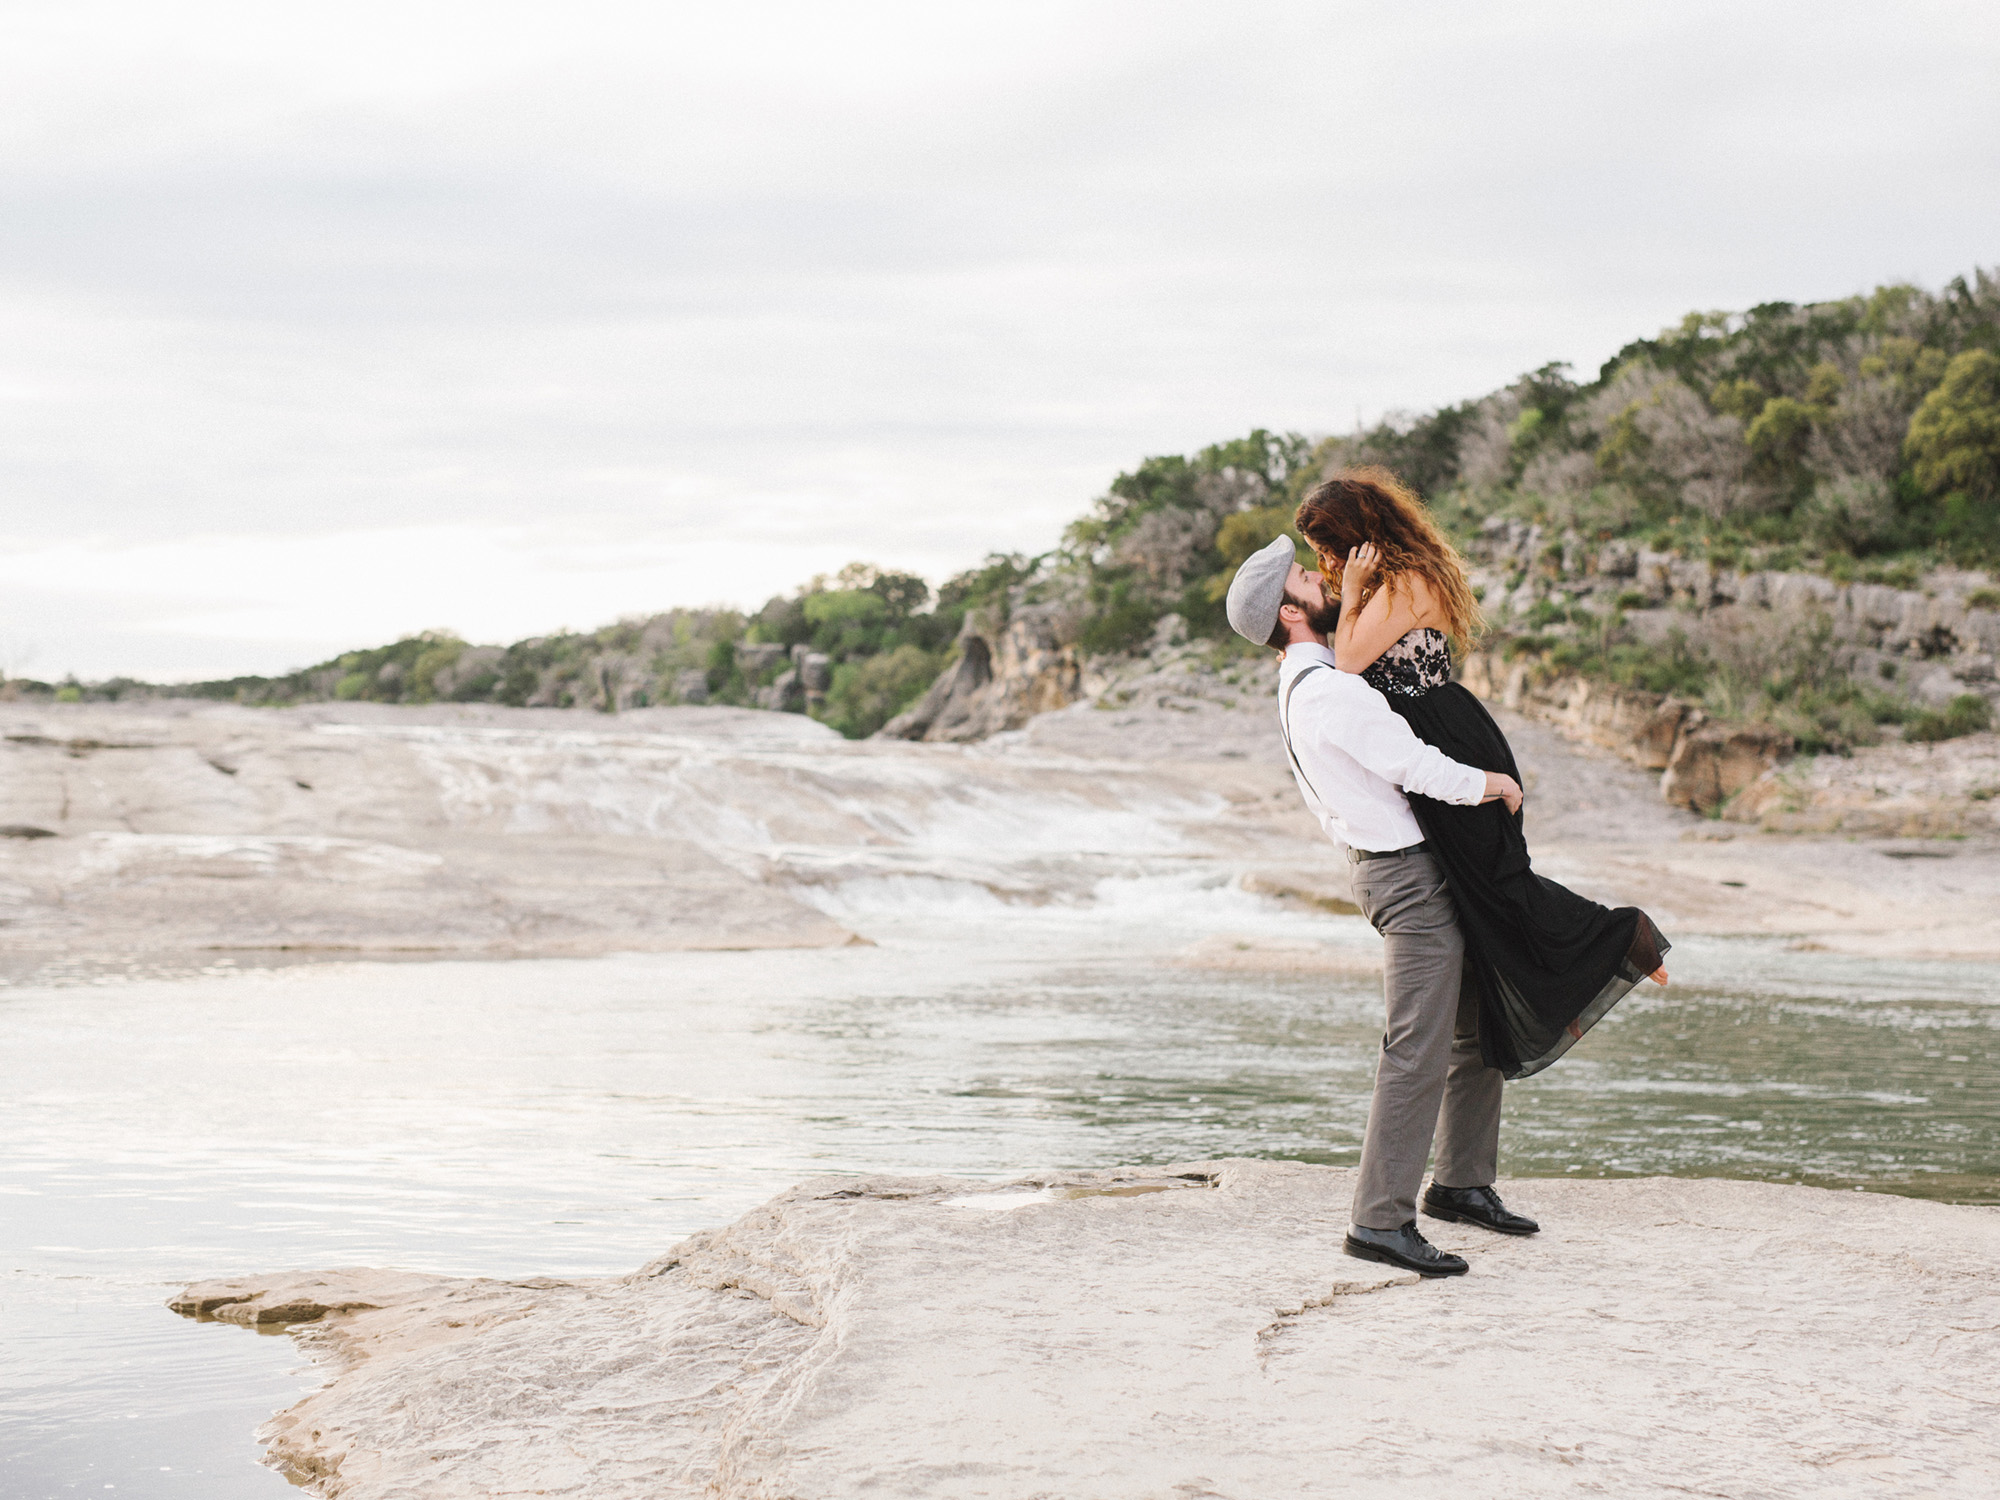 Fine art anniversary session captured at Pedernales Falls State Park by Dallas photographer Tenth & Grace.